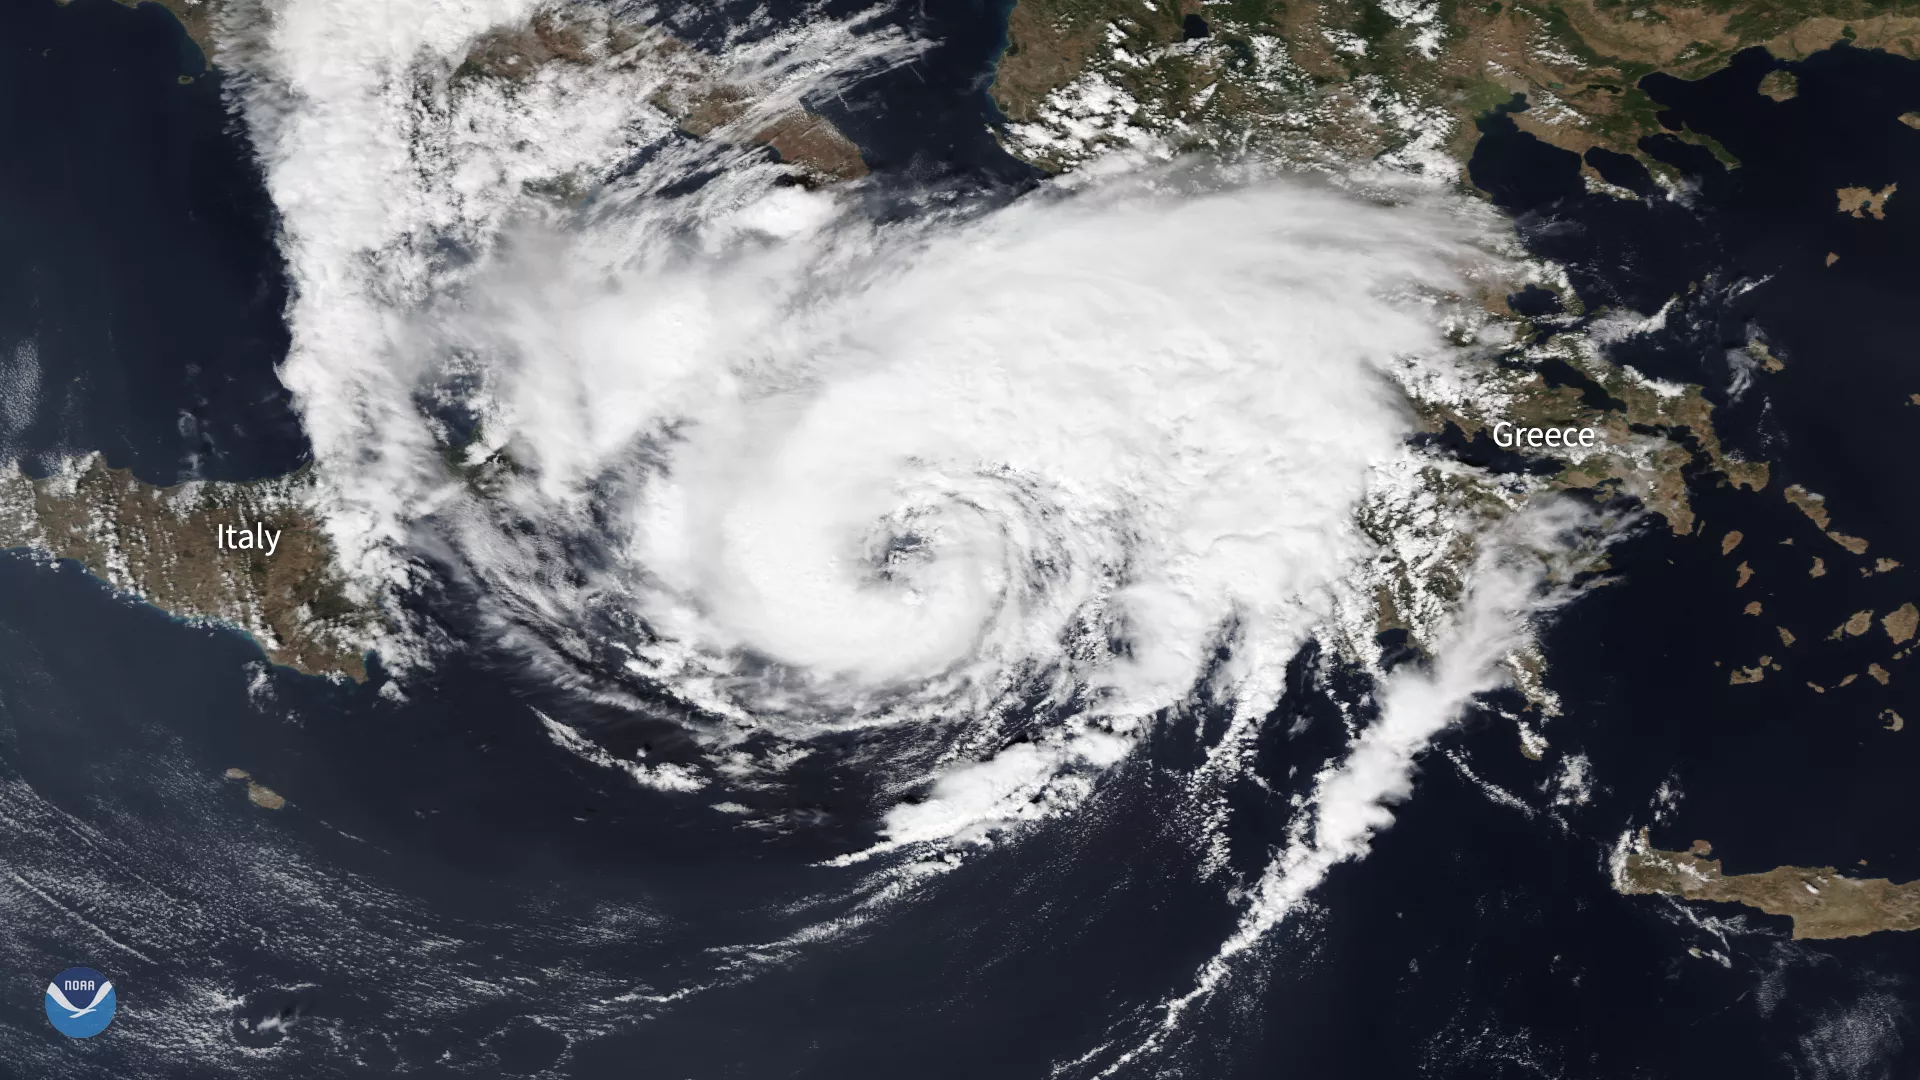 Satellite view of "medicane" storm approaching Greece over the Mediterranean Sea.